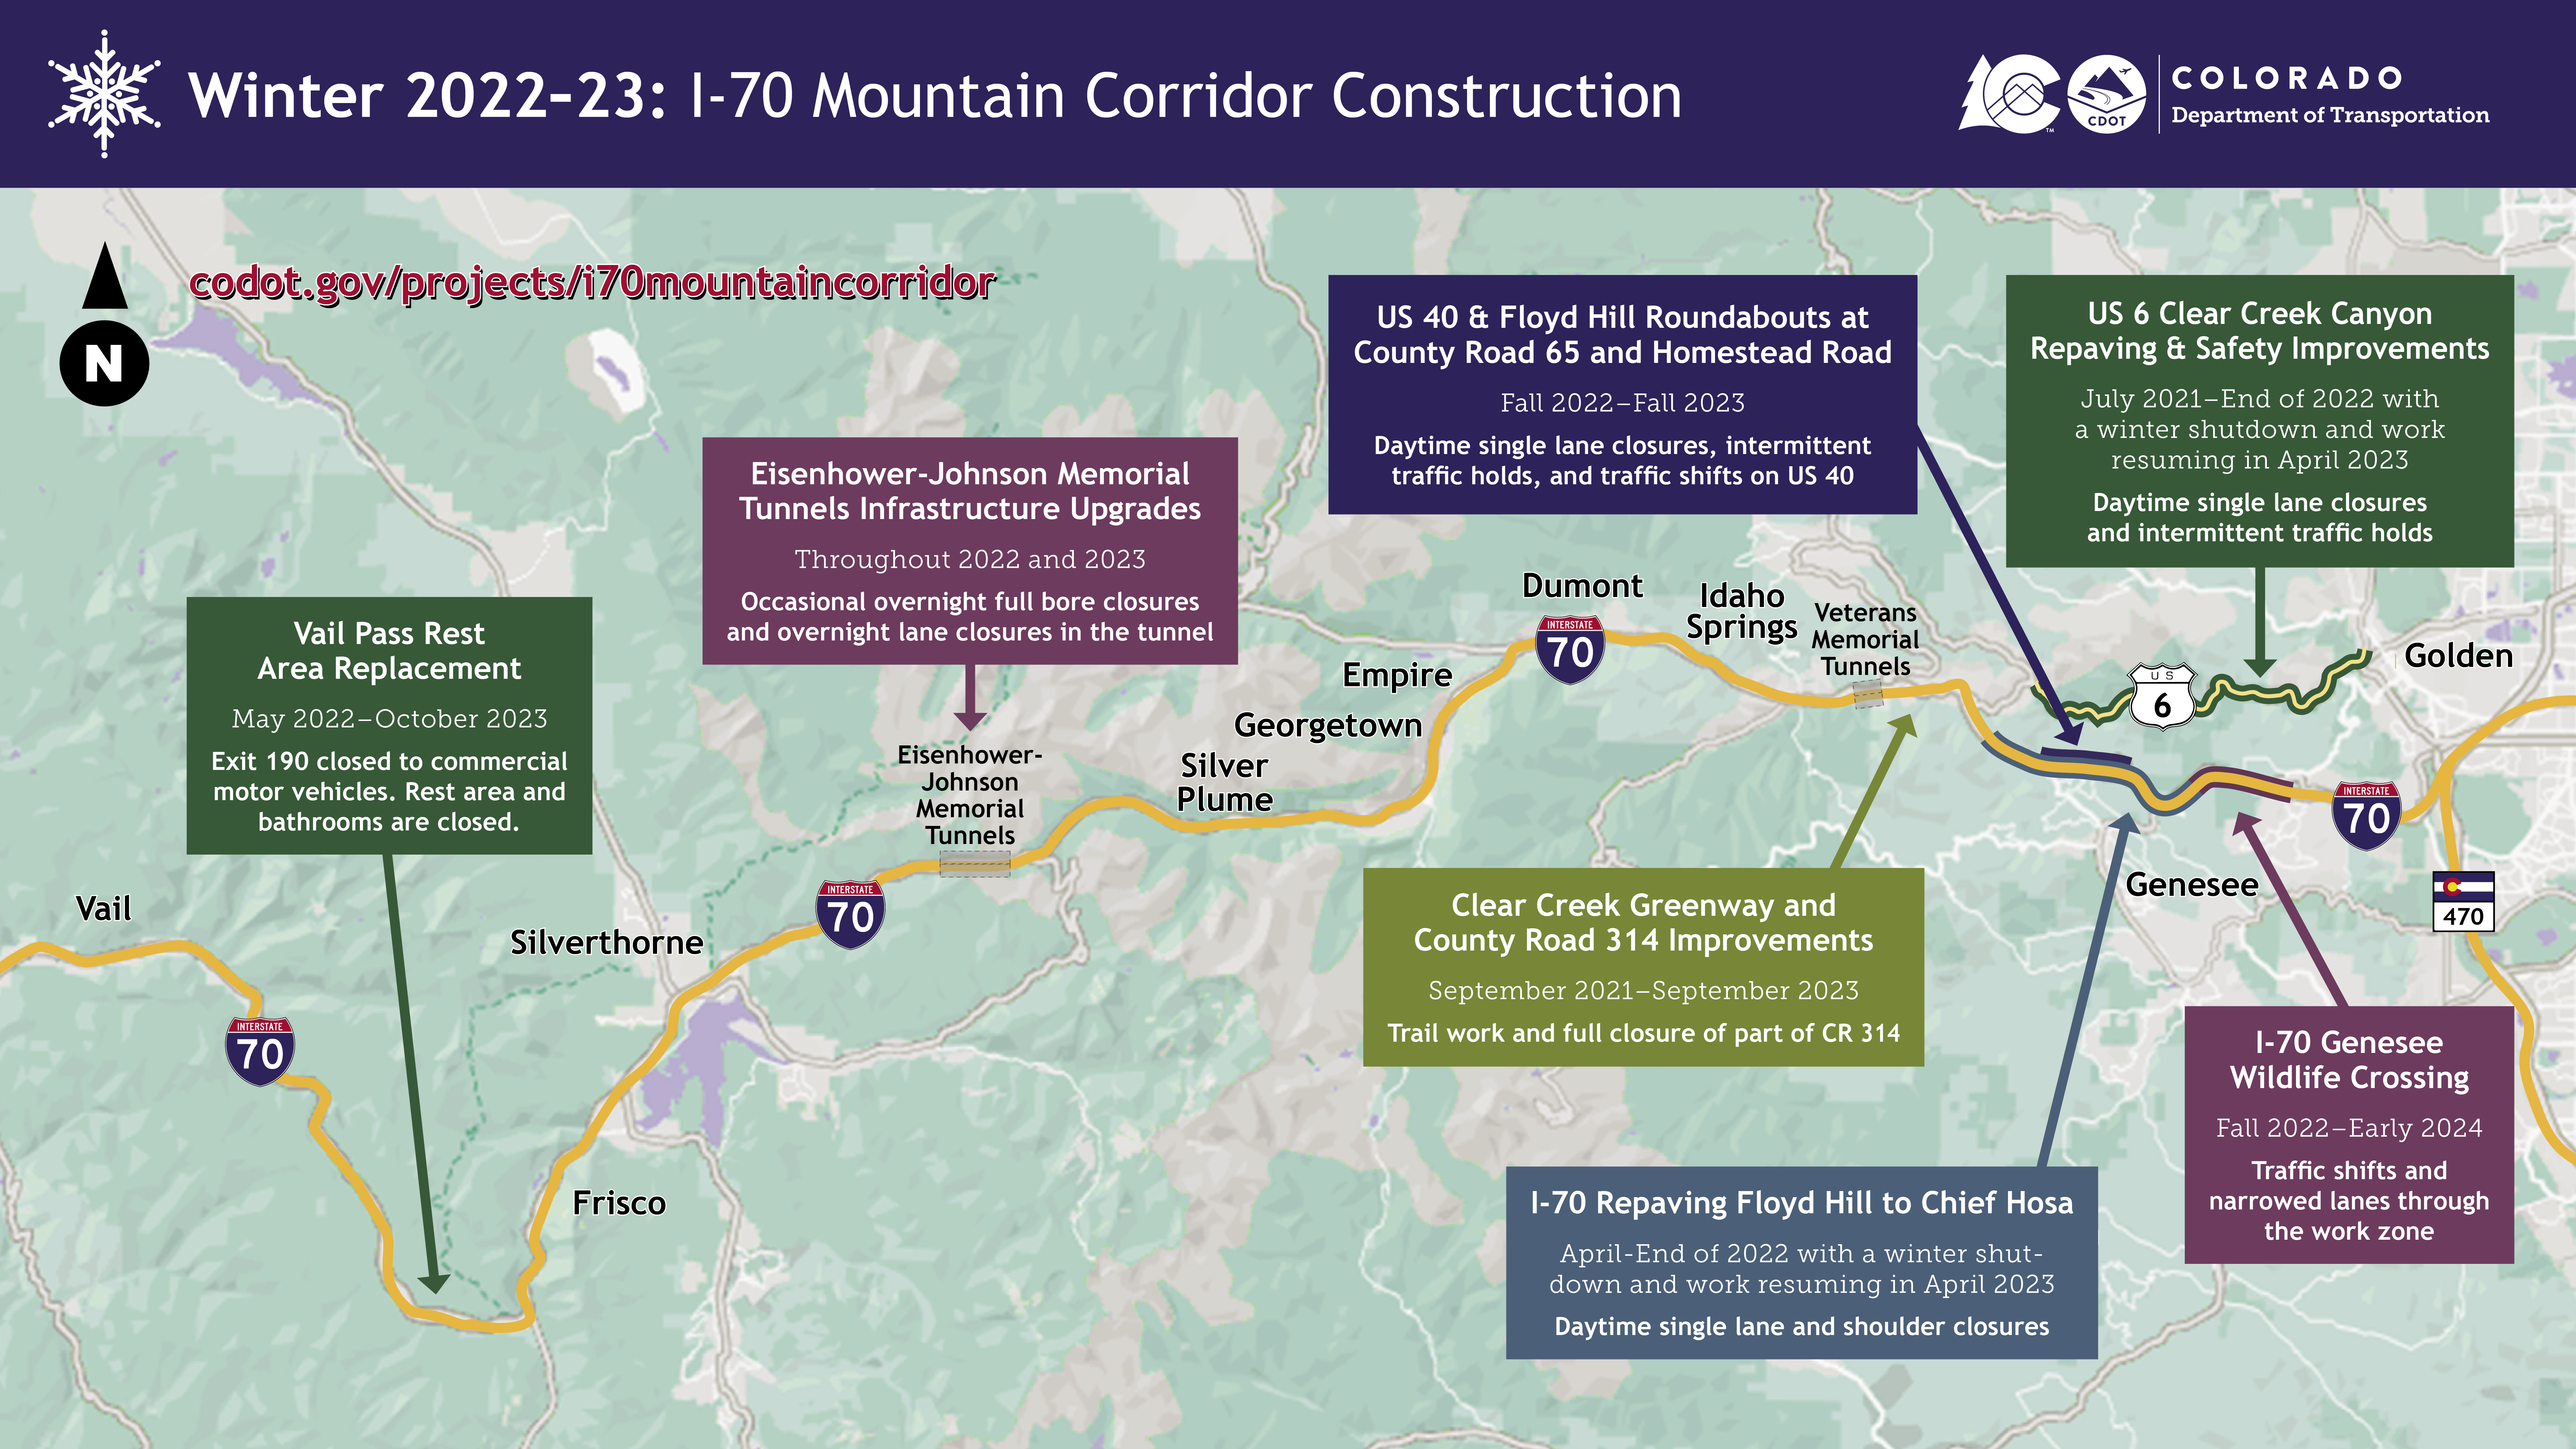 I-70 Project Map_MountainCorridor_Winter 2022-23.jpg detail image